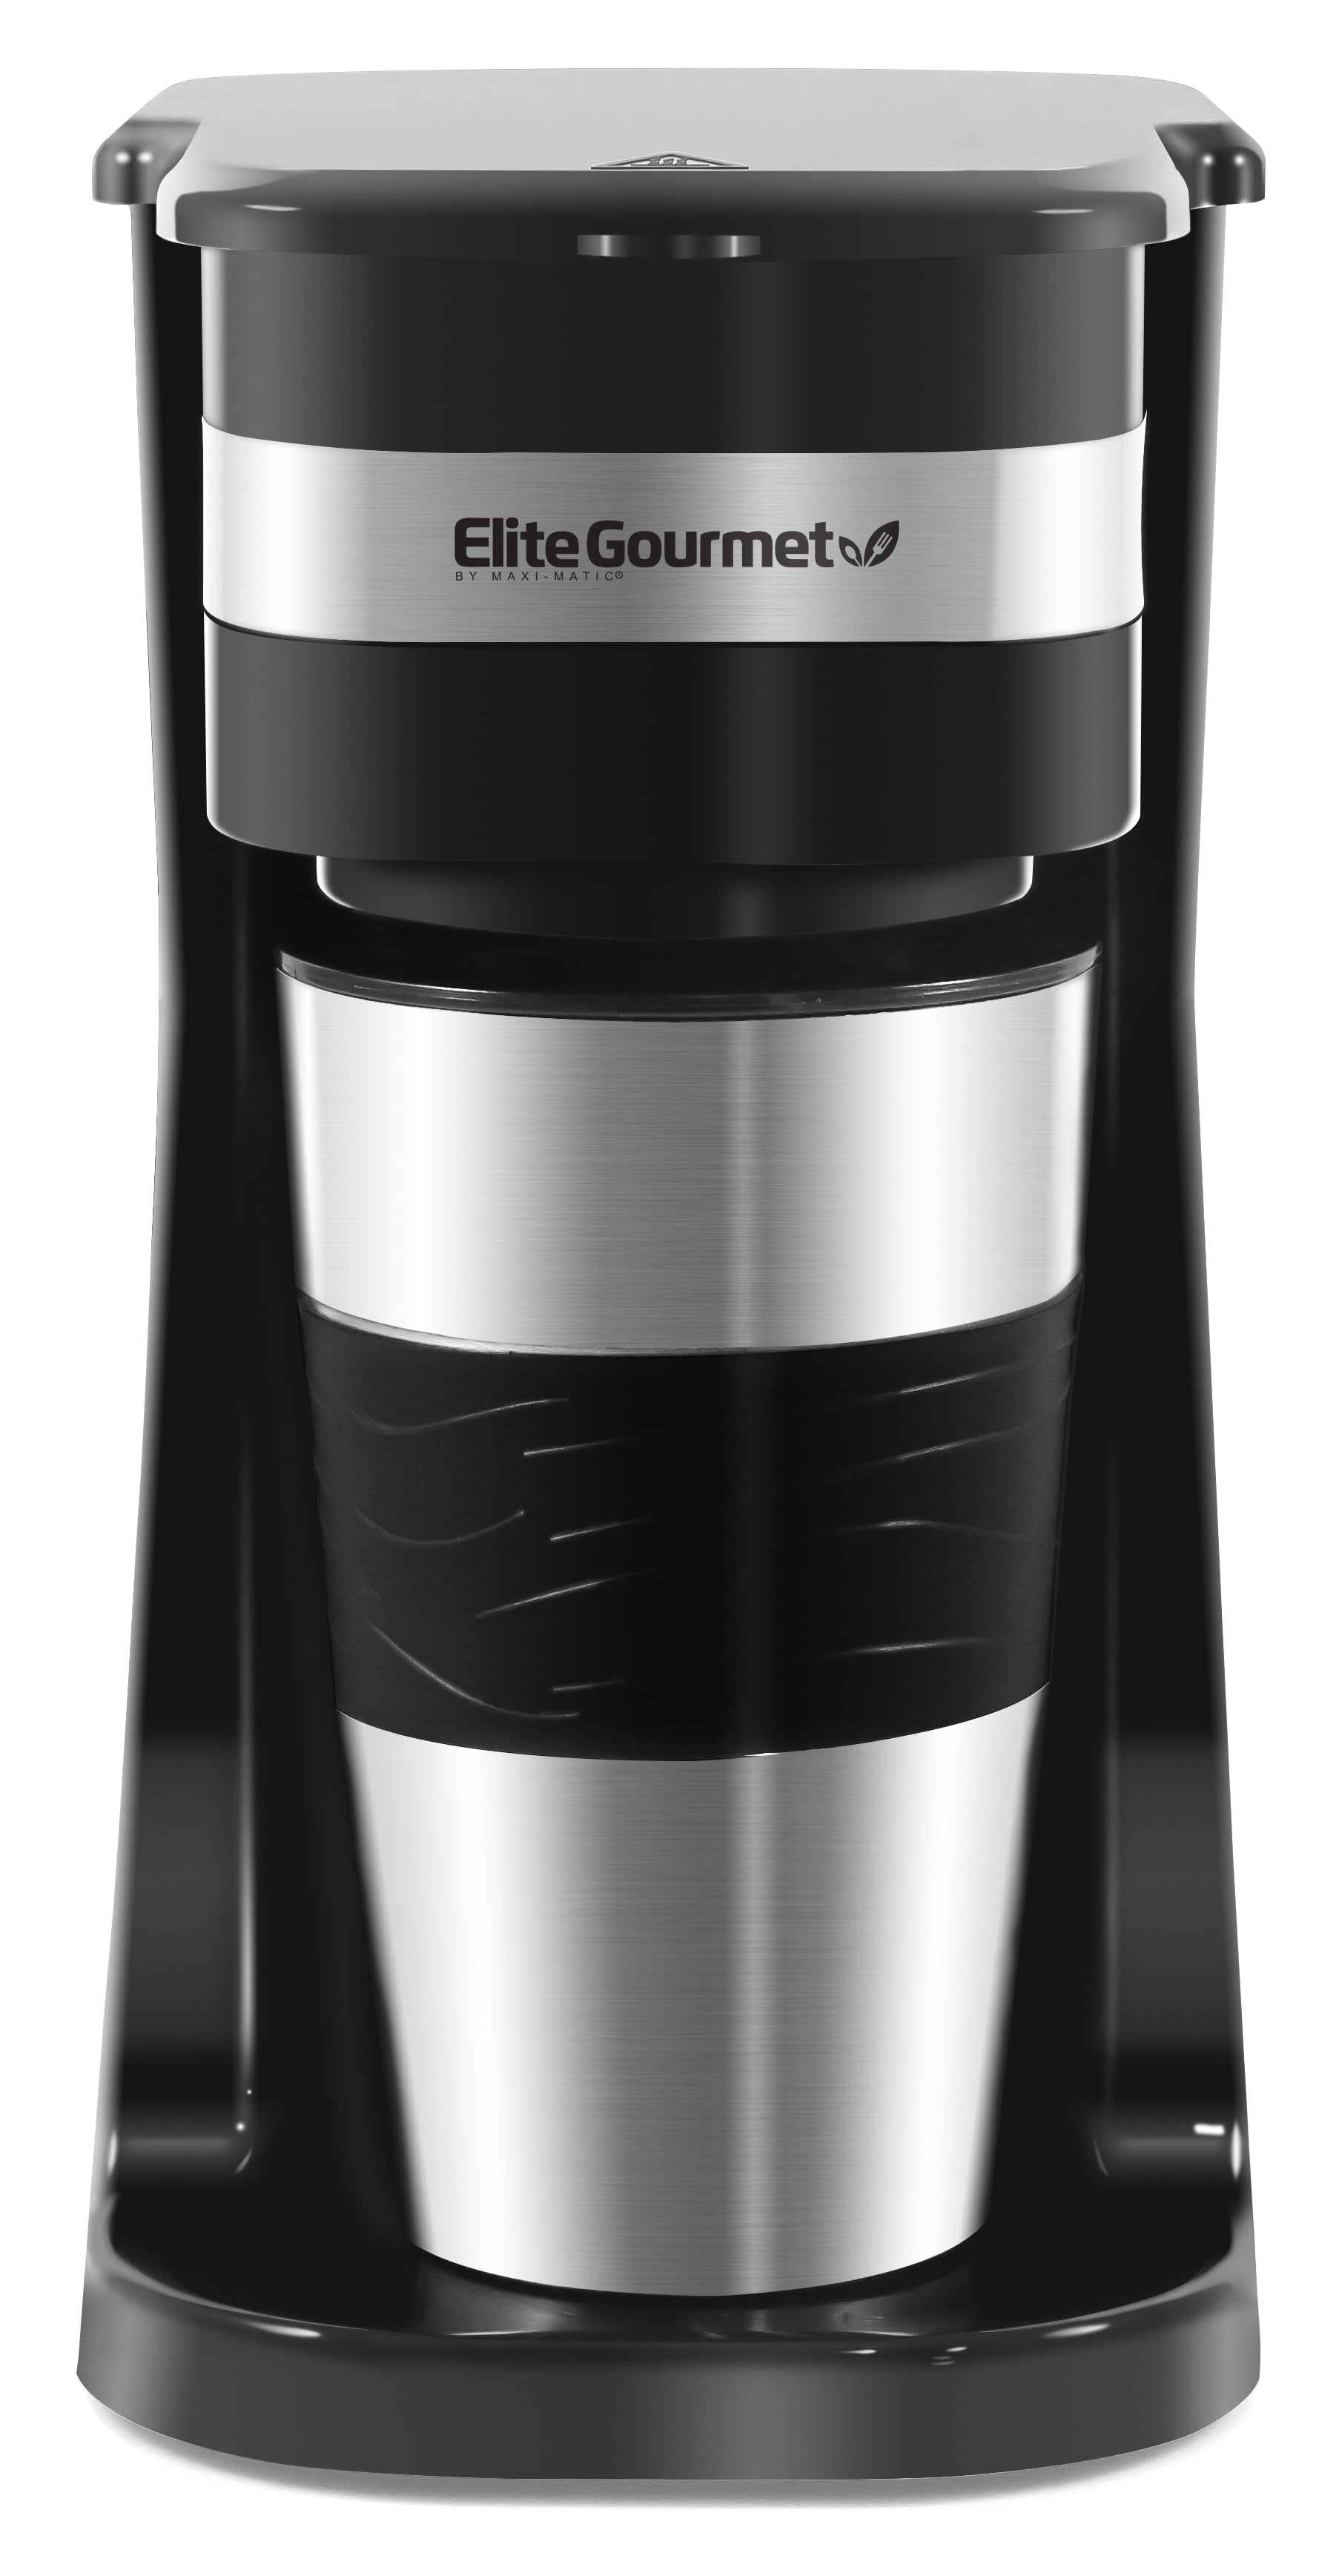 Elite Gourmet Dual Coffee Maker with Two Stainless Steel Interior